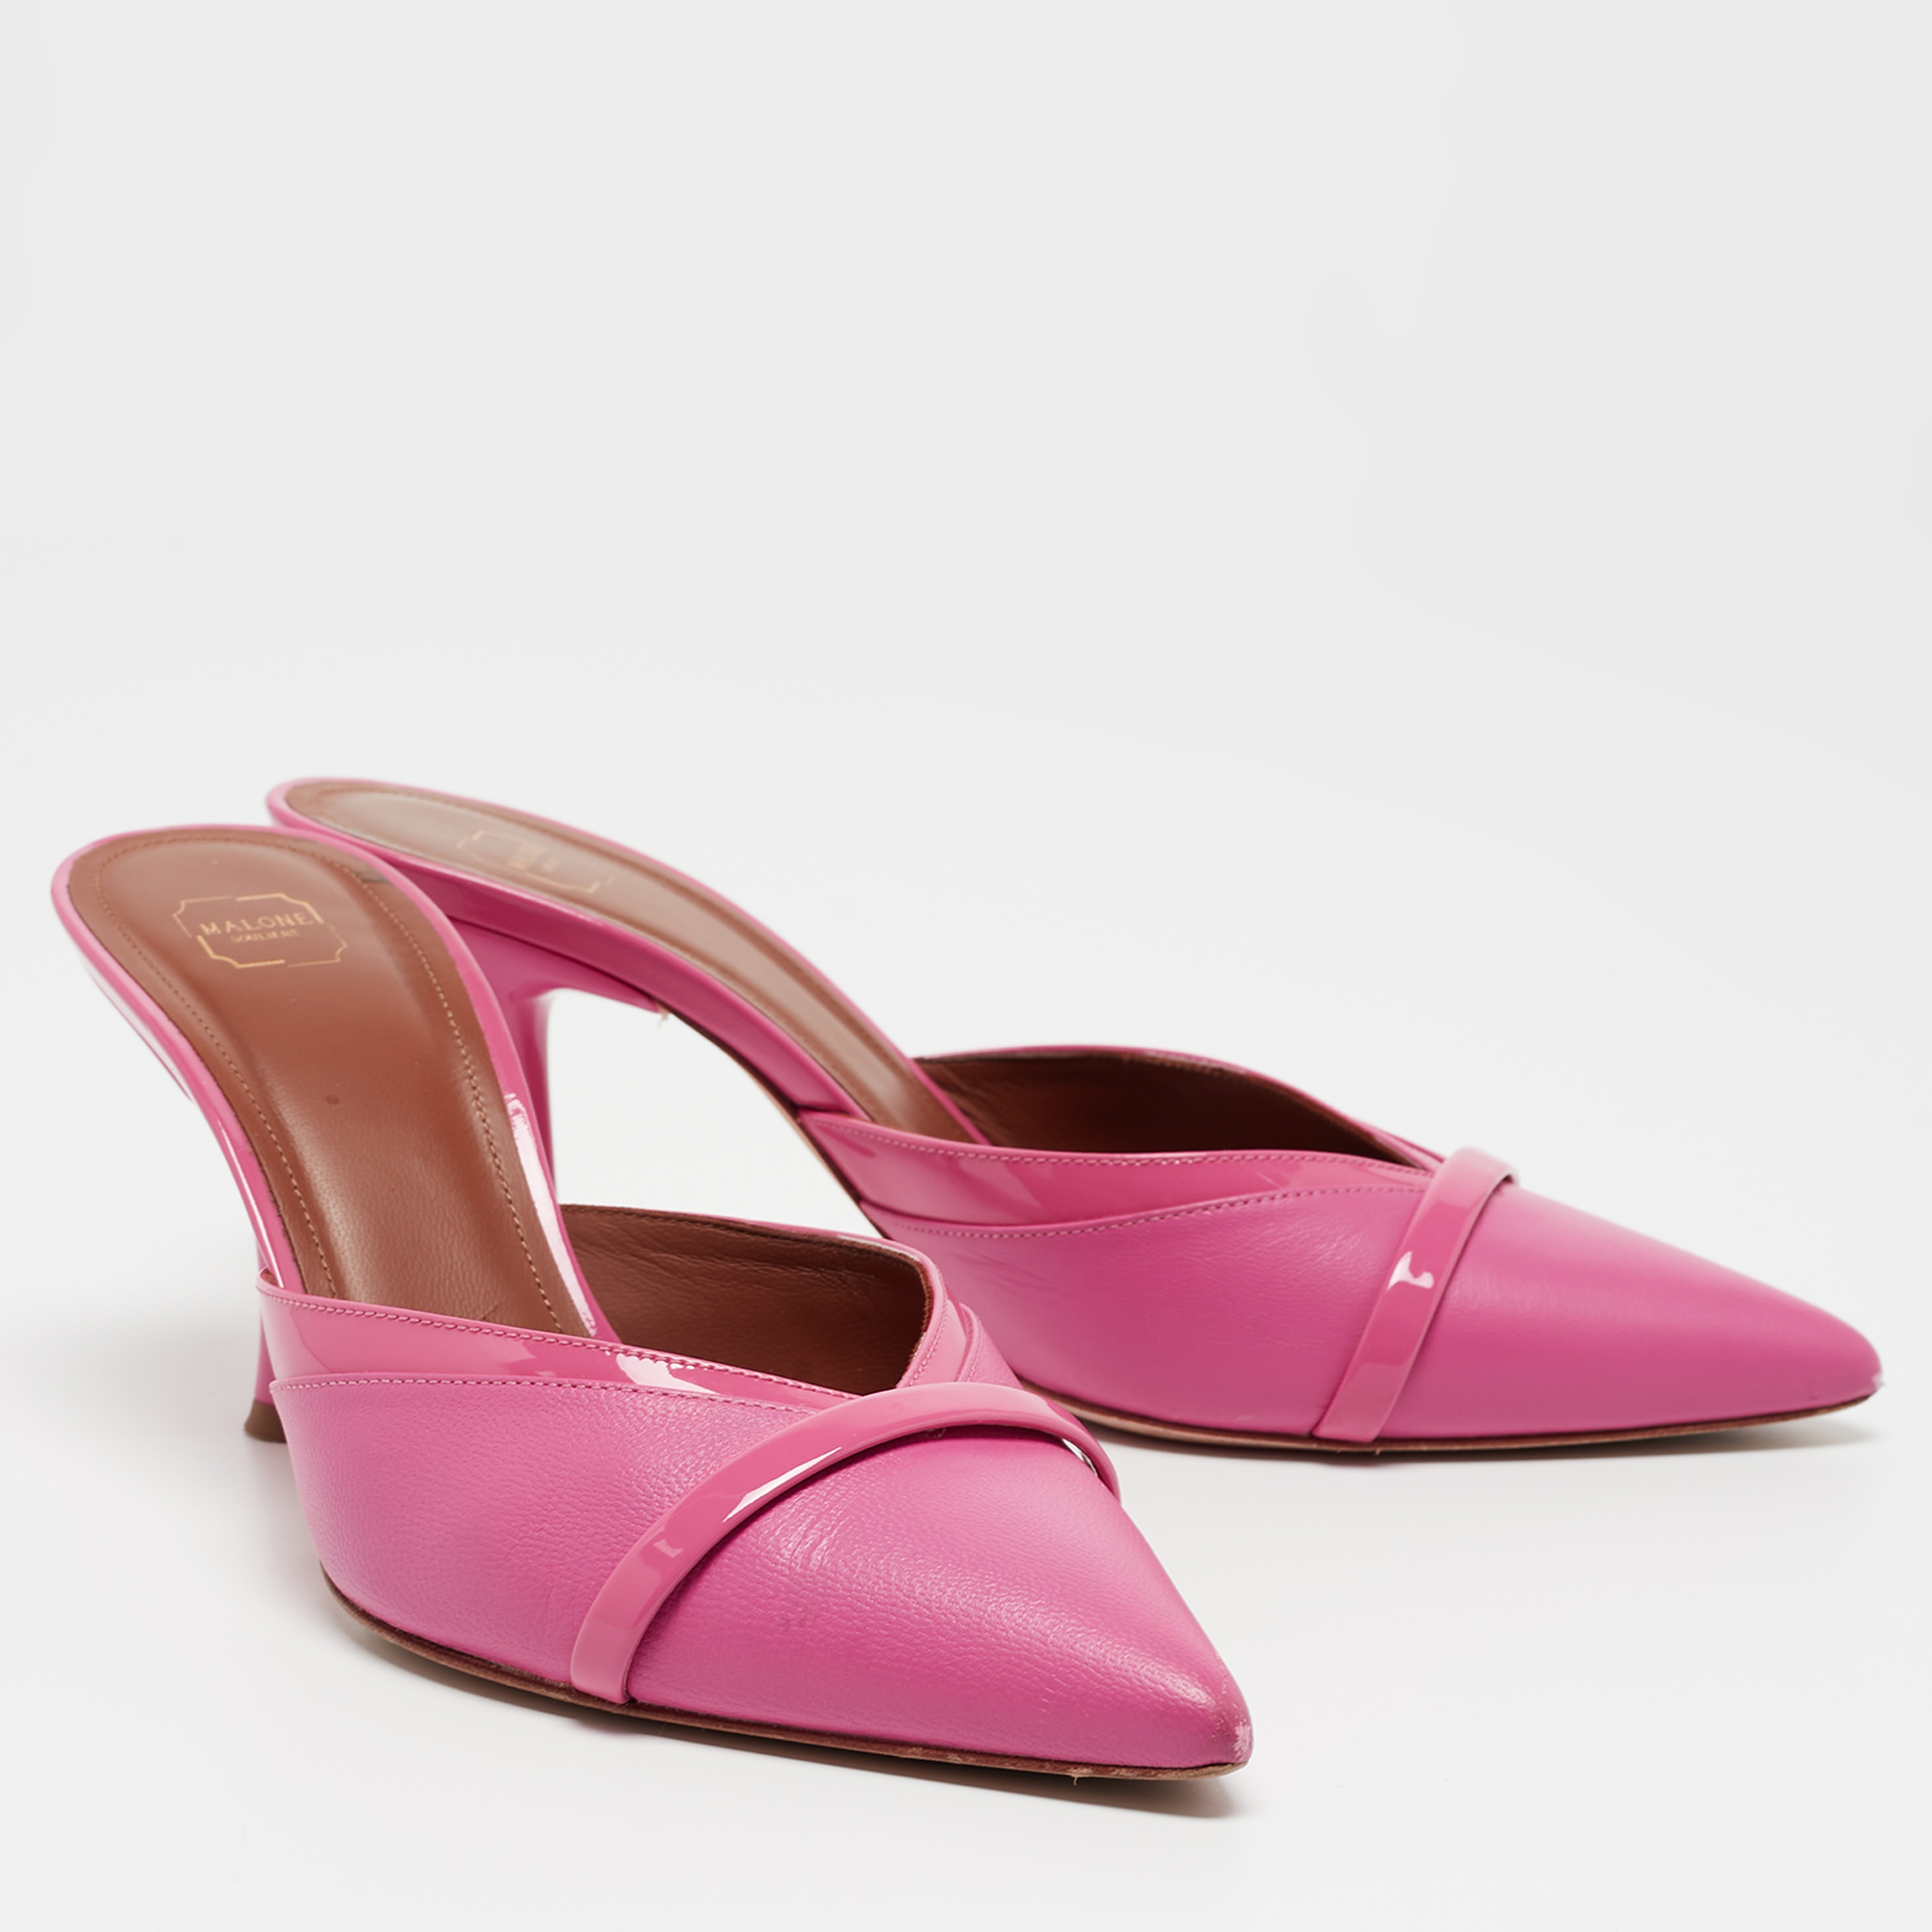 Malone Souliers Pink Patent And Leather Jake Mules Size 39